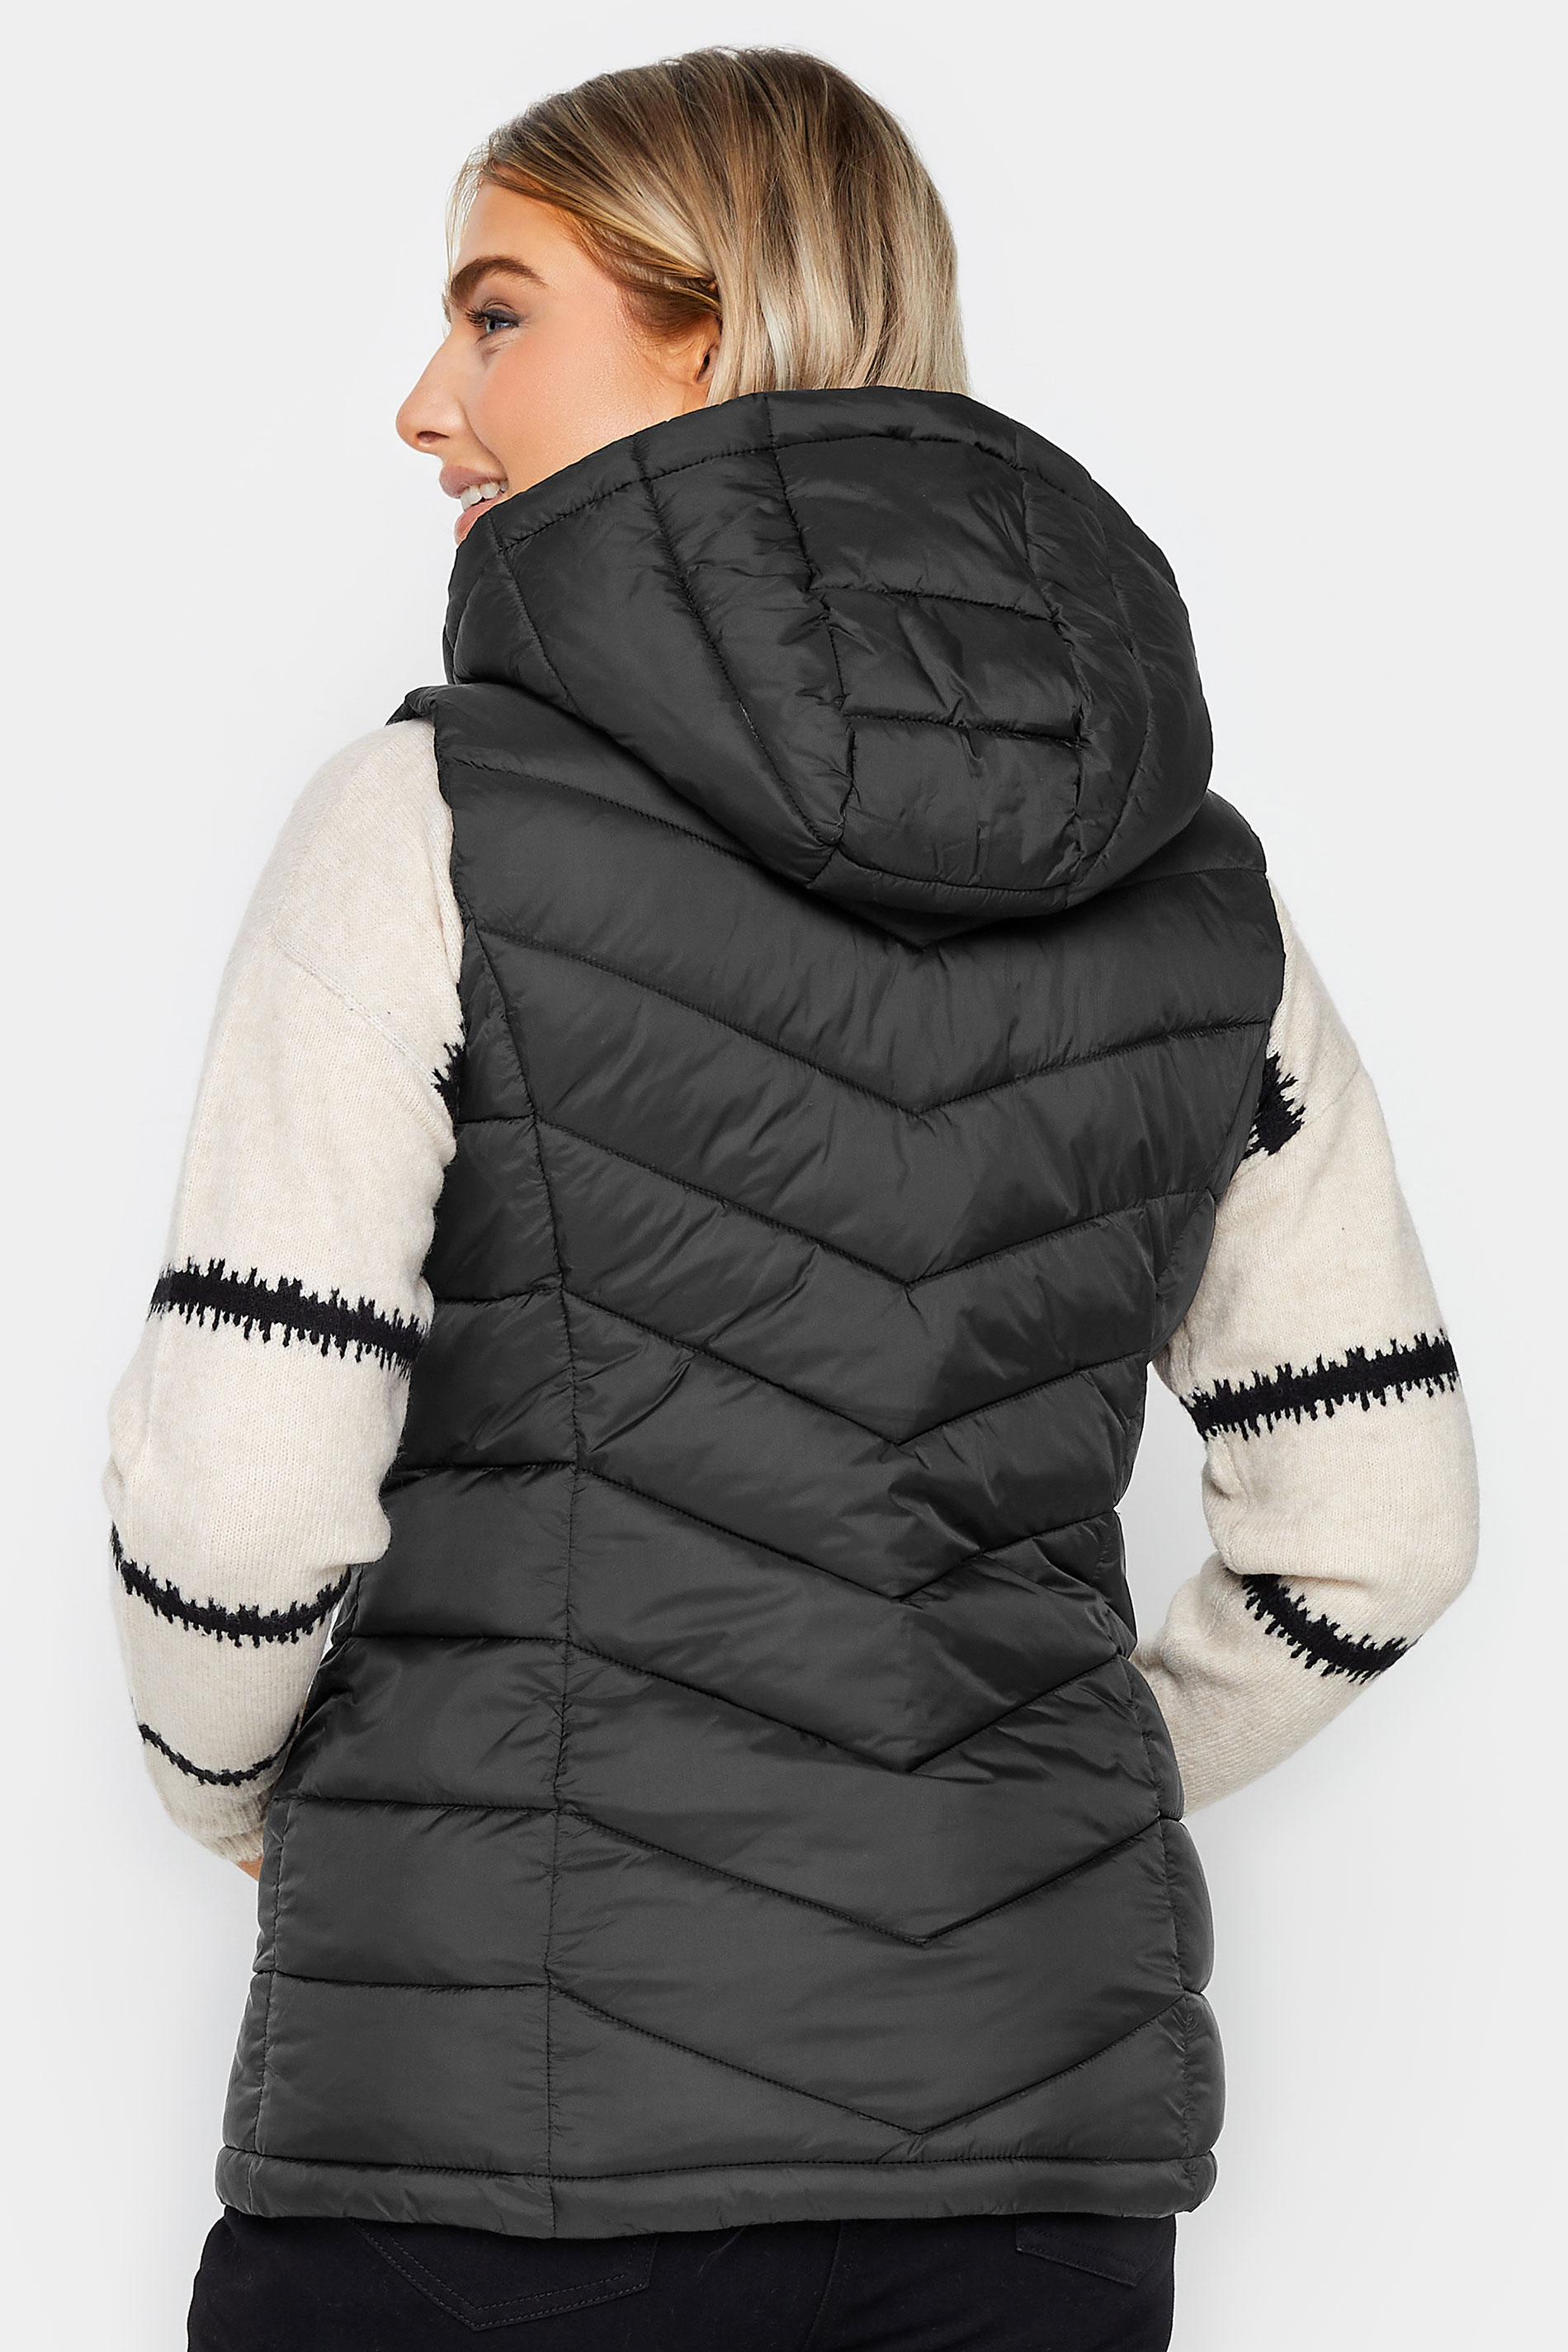 M&Co Black Quilted Gilet | M&Co 3